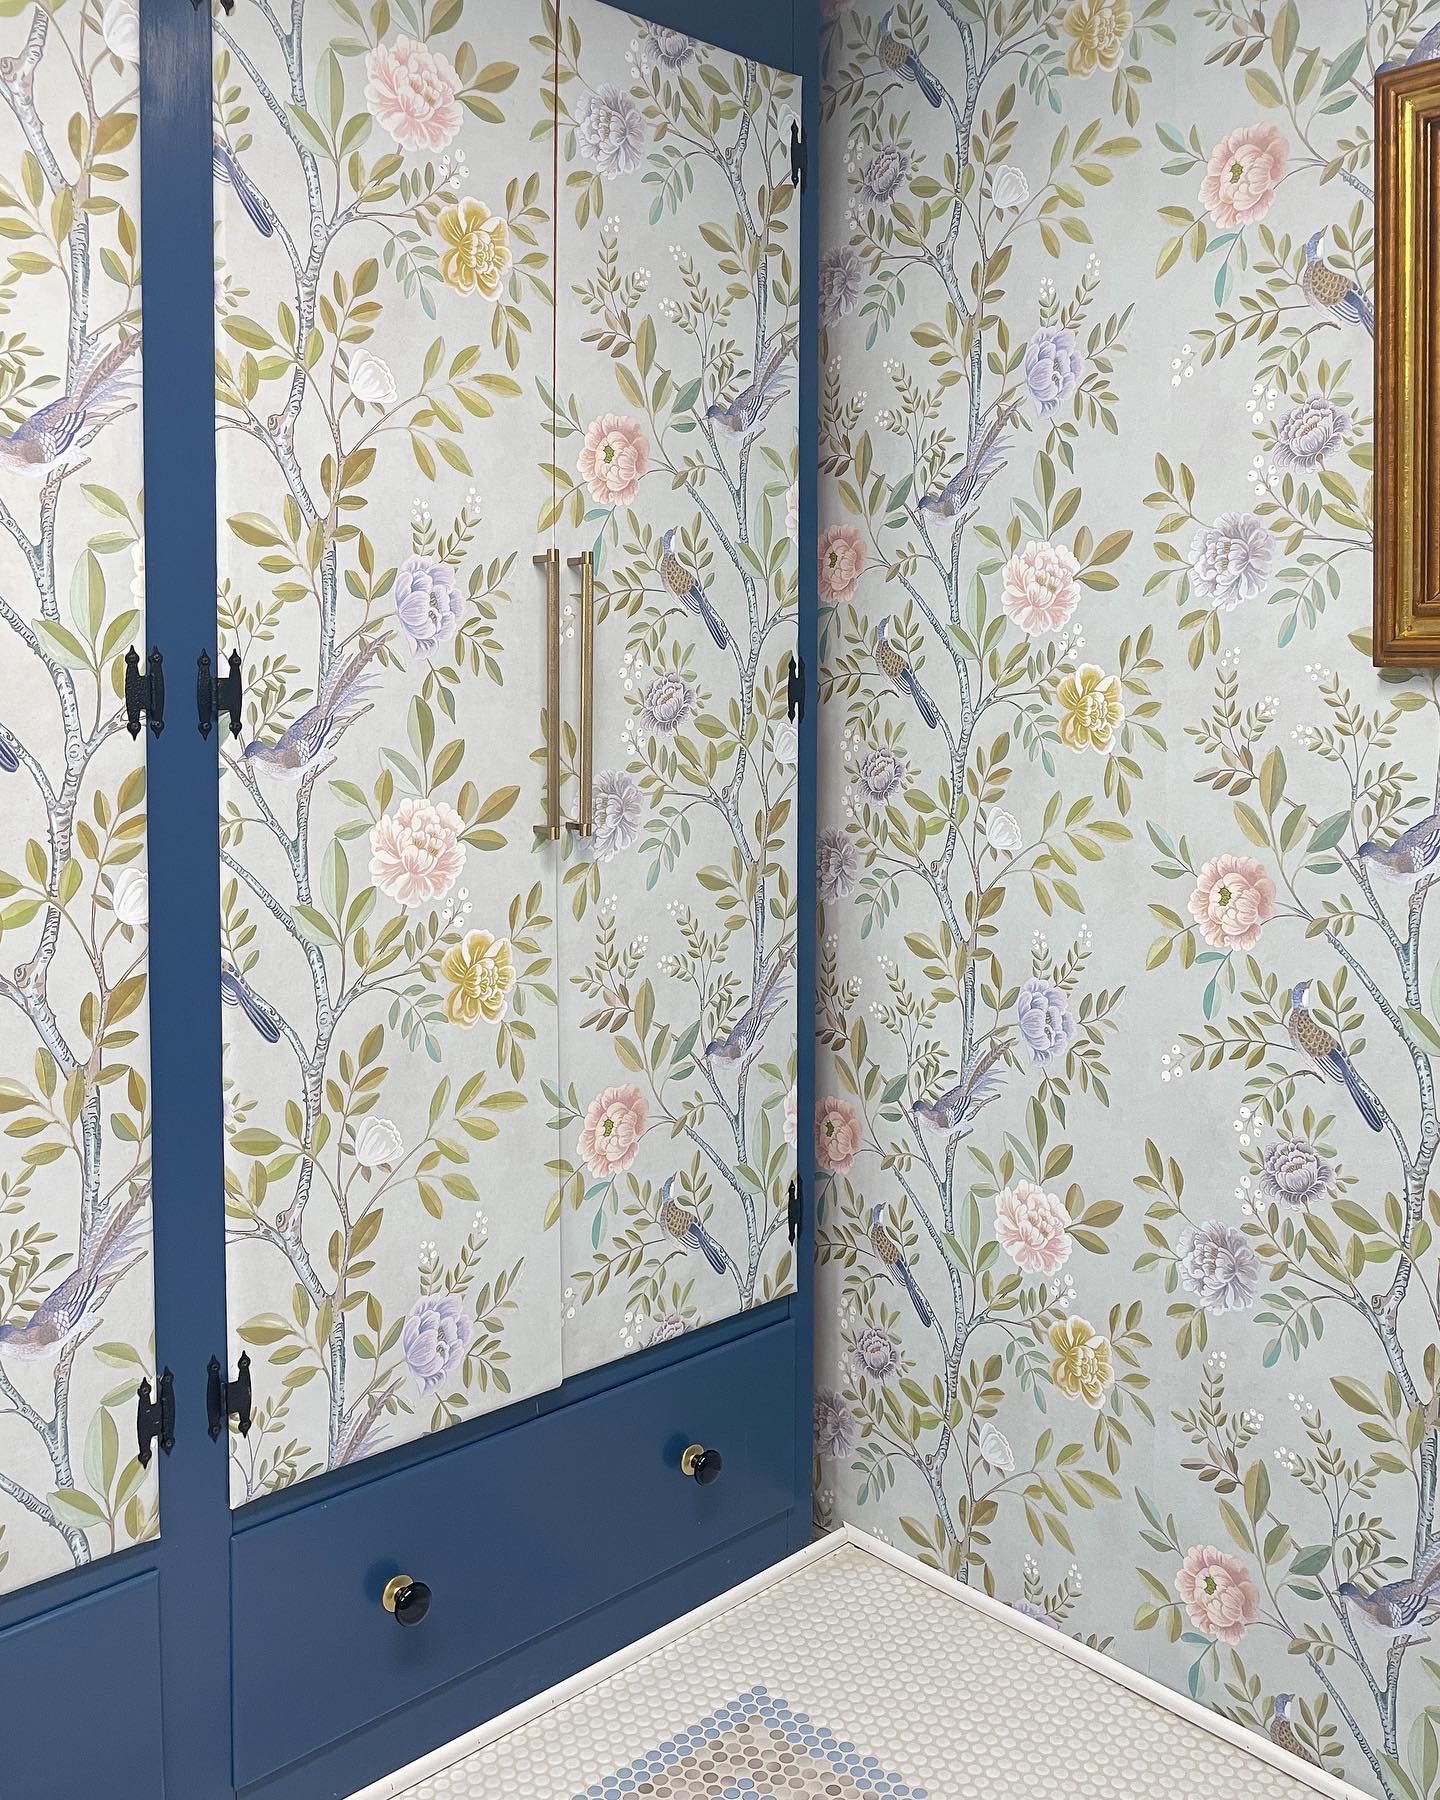 Laundry Room Wallpaper • Chinoiserie Wallpaper • Mehr Niazi • Blue Orchid living • Laundry Room Doors